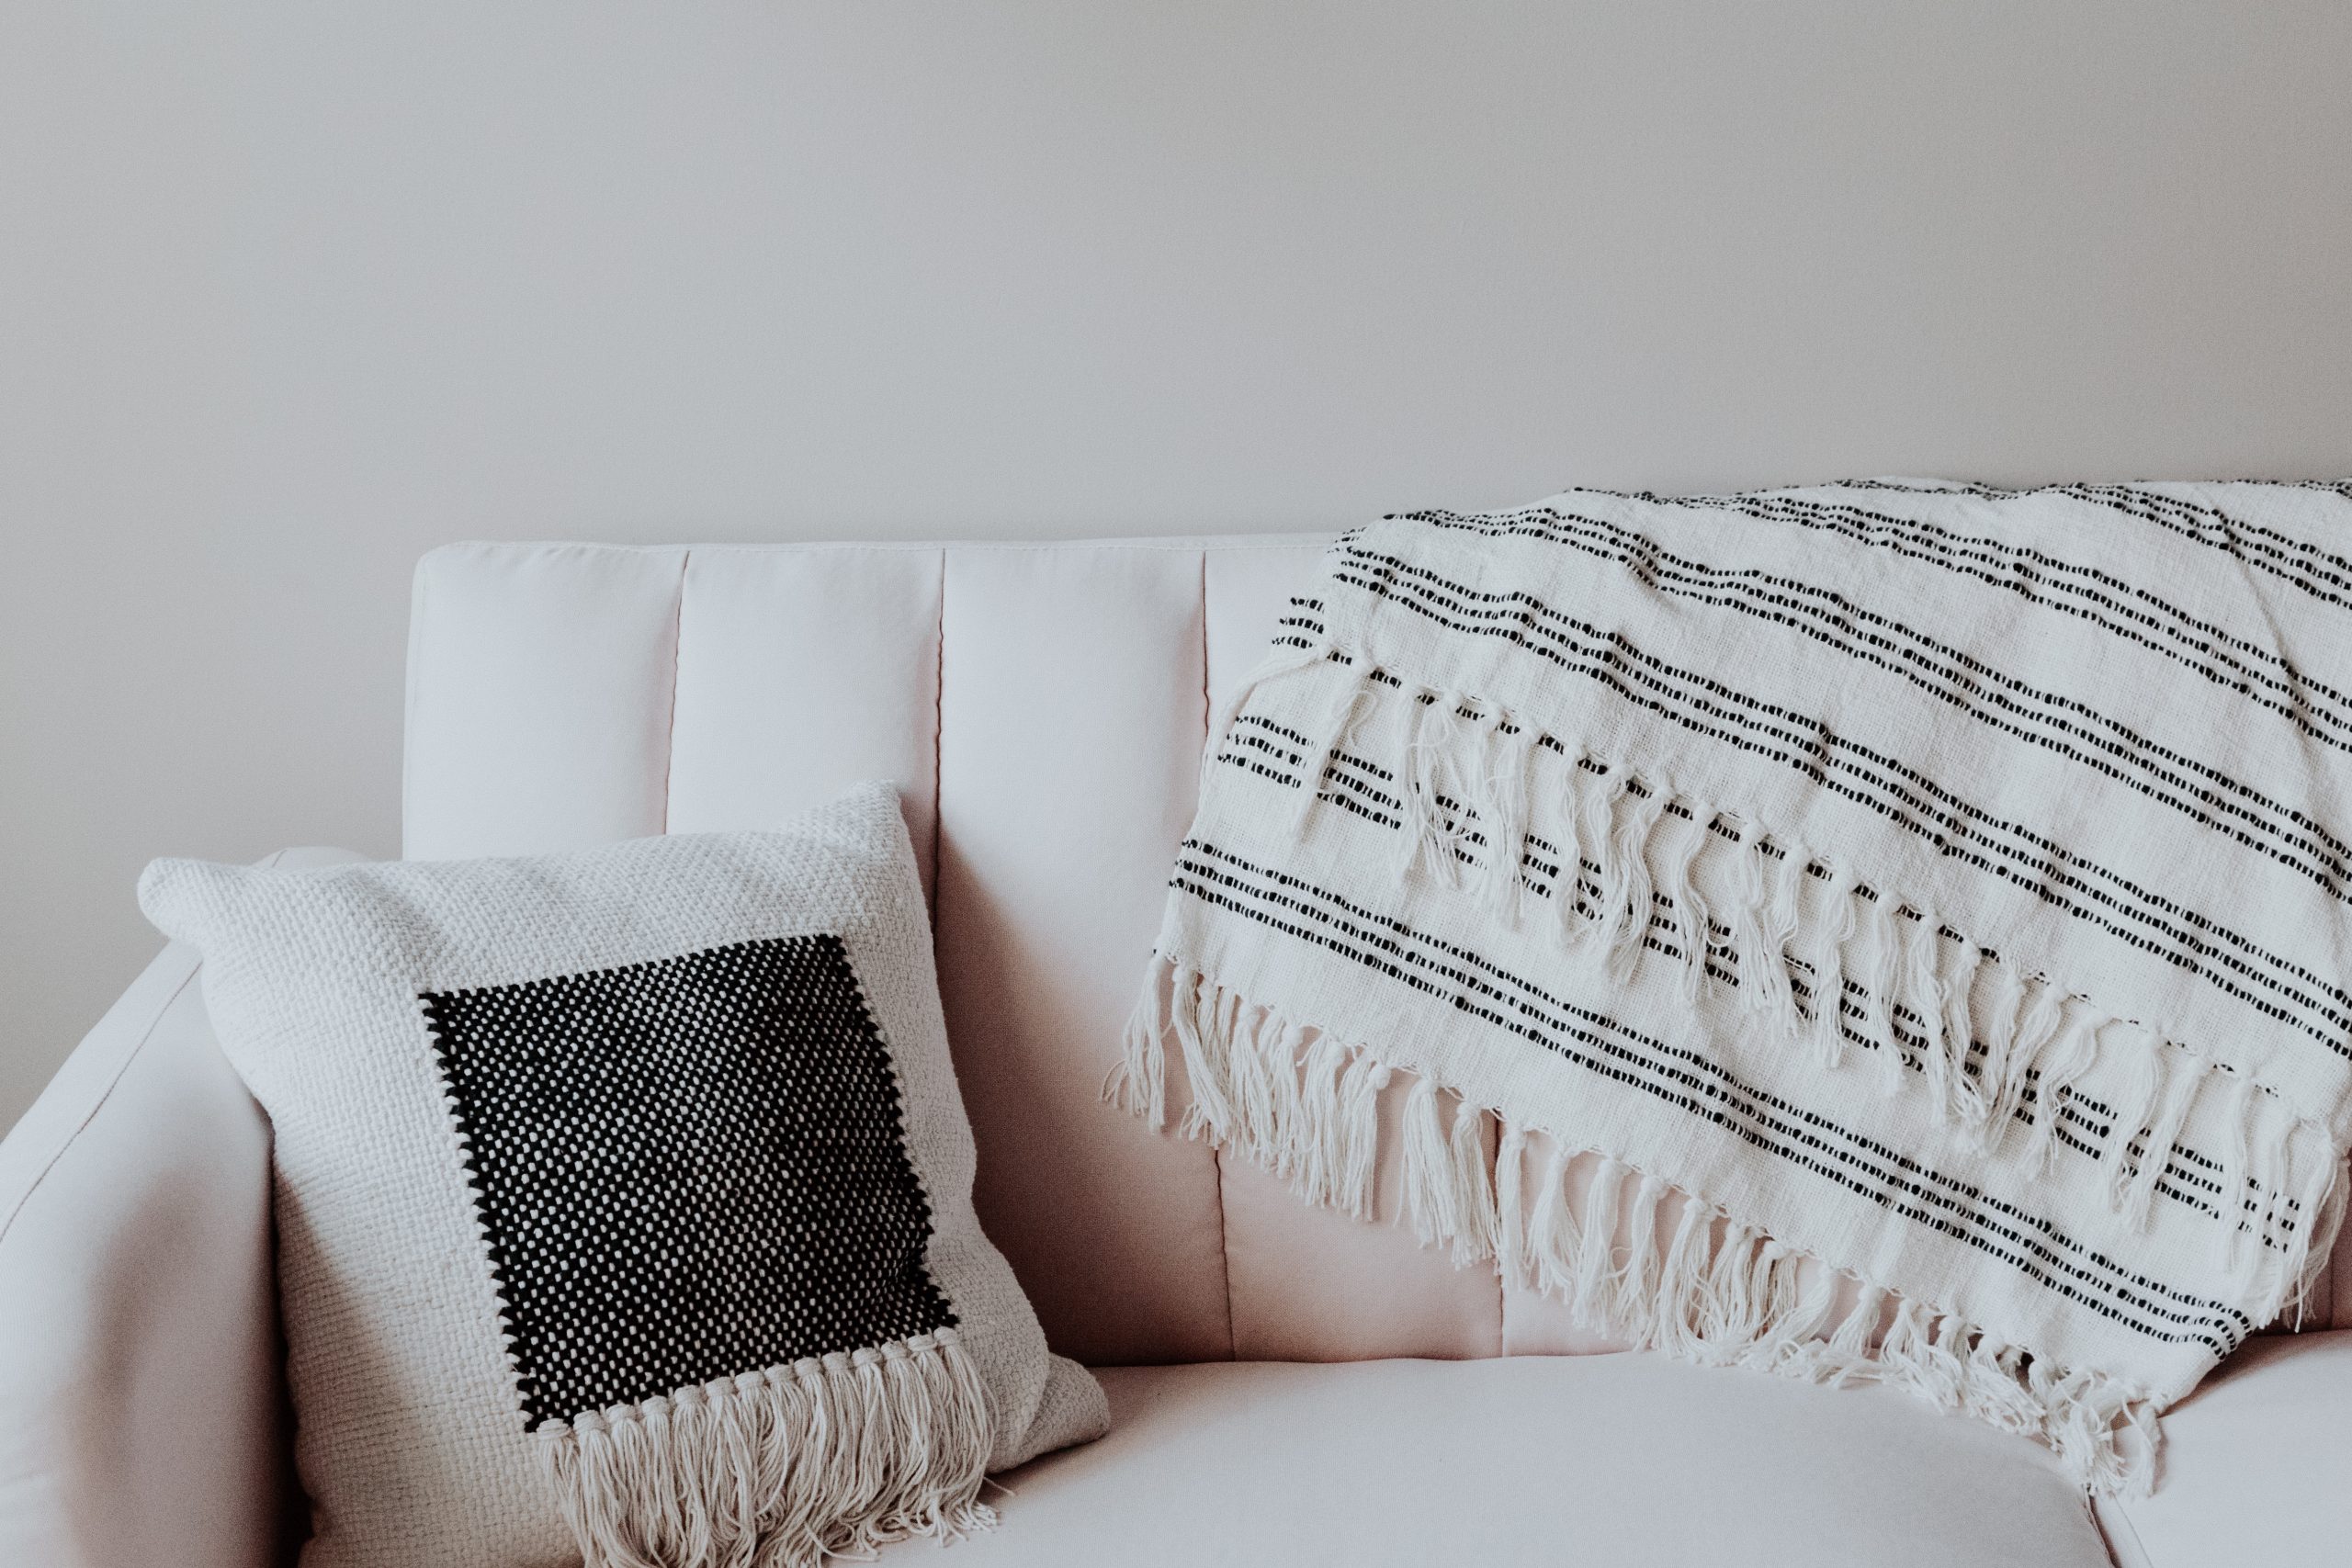 7 Amazing Throw Blanket Ideas for Any Room